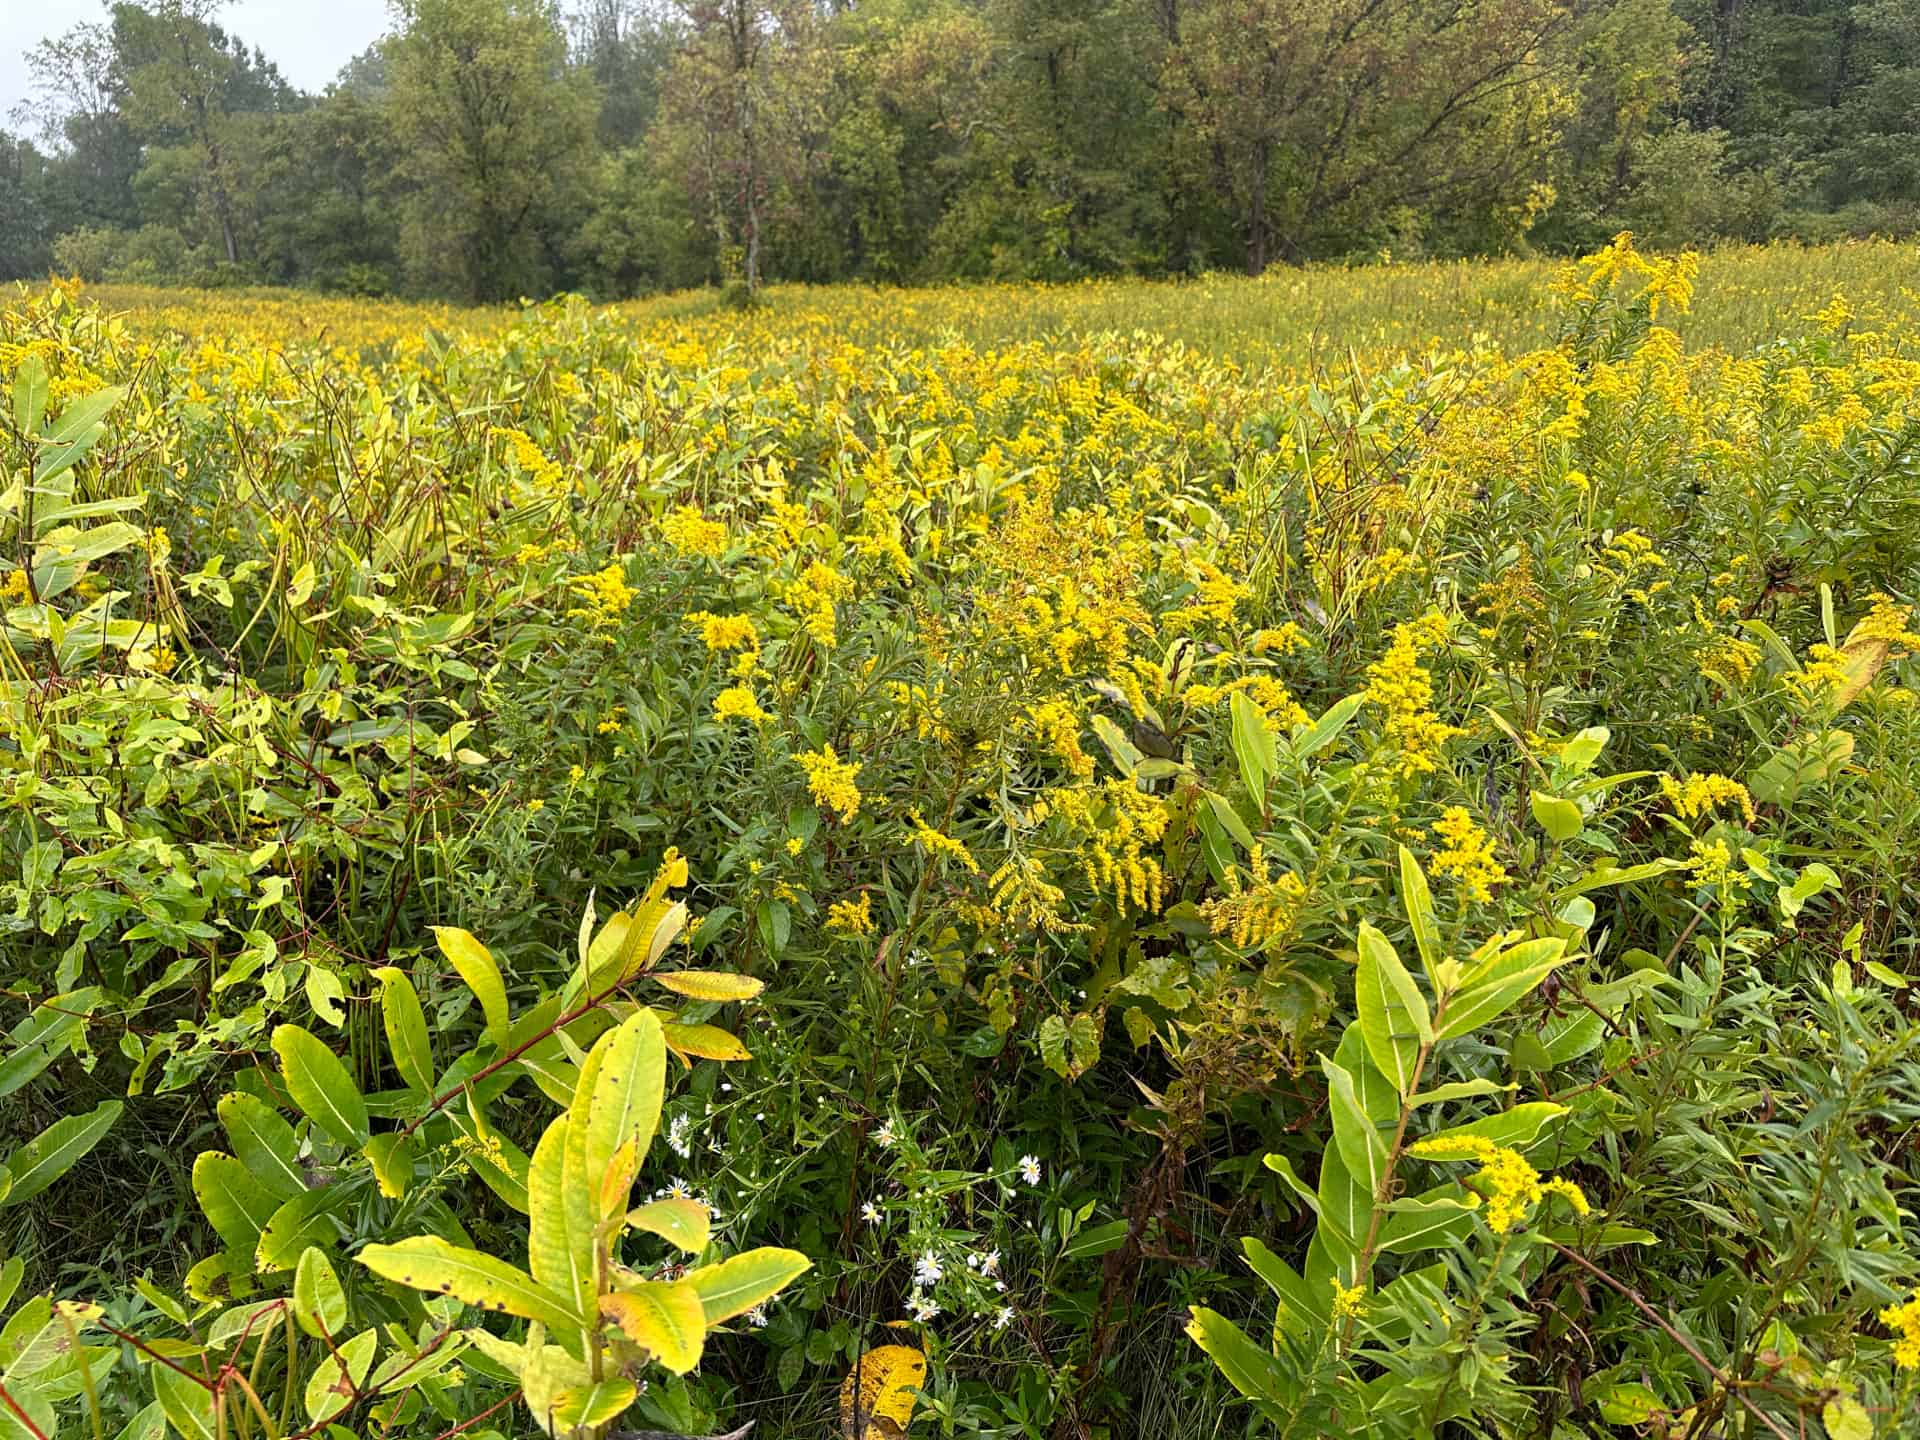 A field of goldenrod with trees in the background